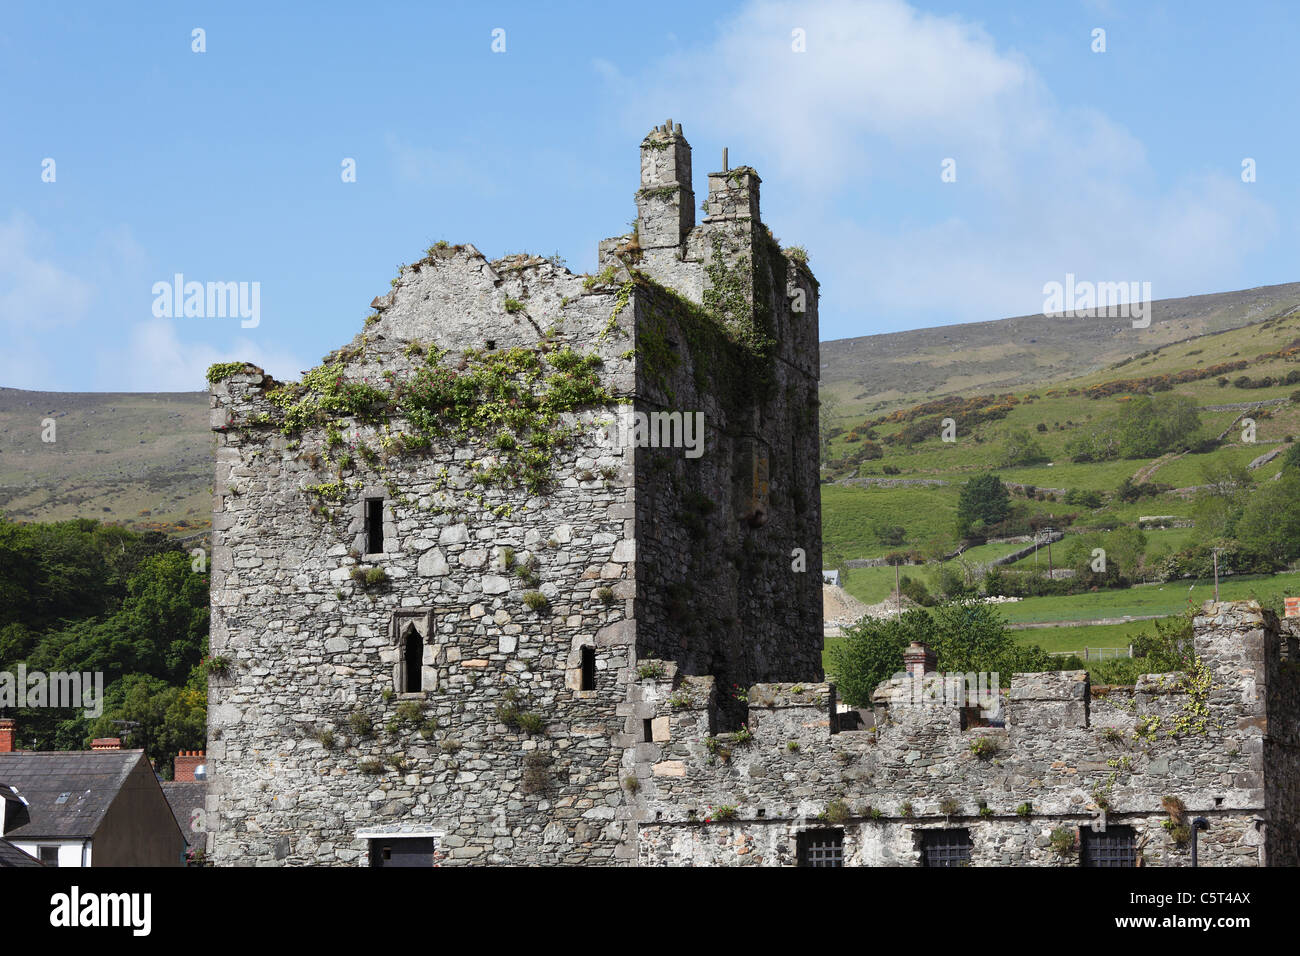 Republic of Ireland, County Louth, Cooley peninsula, Carlingford, View of Taafe's Castle Stock Photo